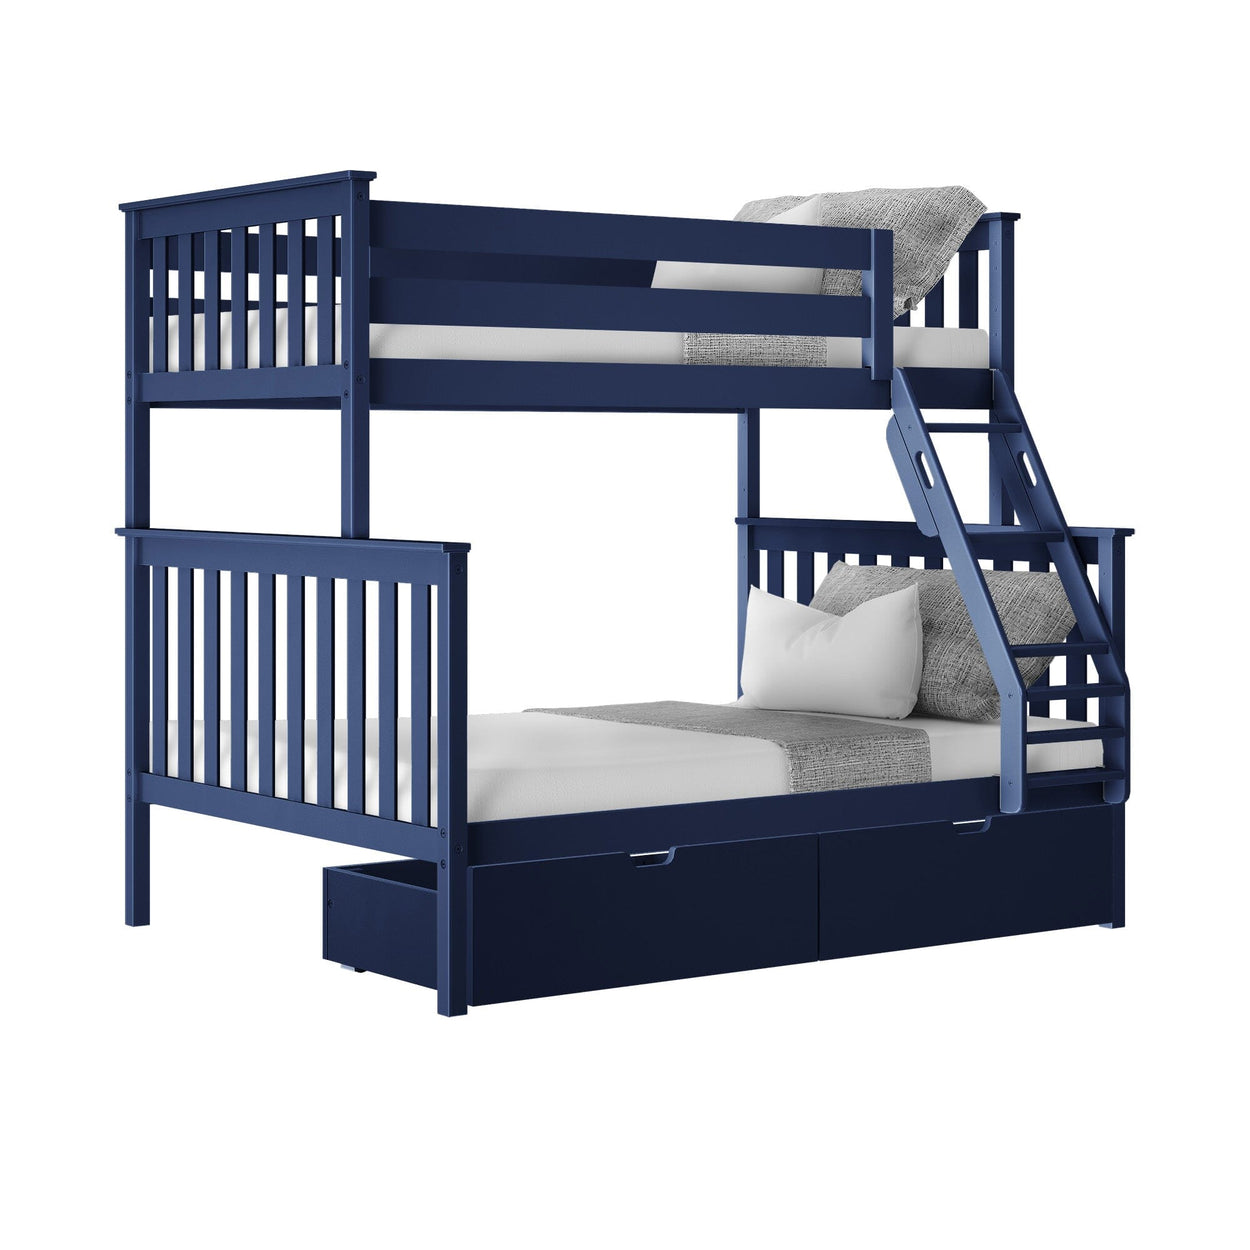 187231-131 : Bunk Beds Twin over Full Bunk Bed + Storage Drawers, Blue